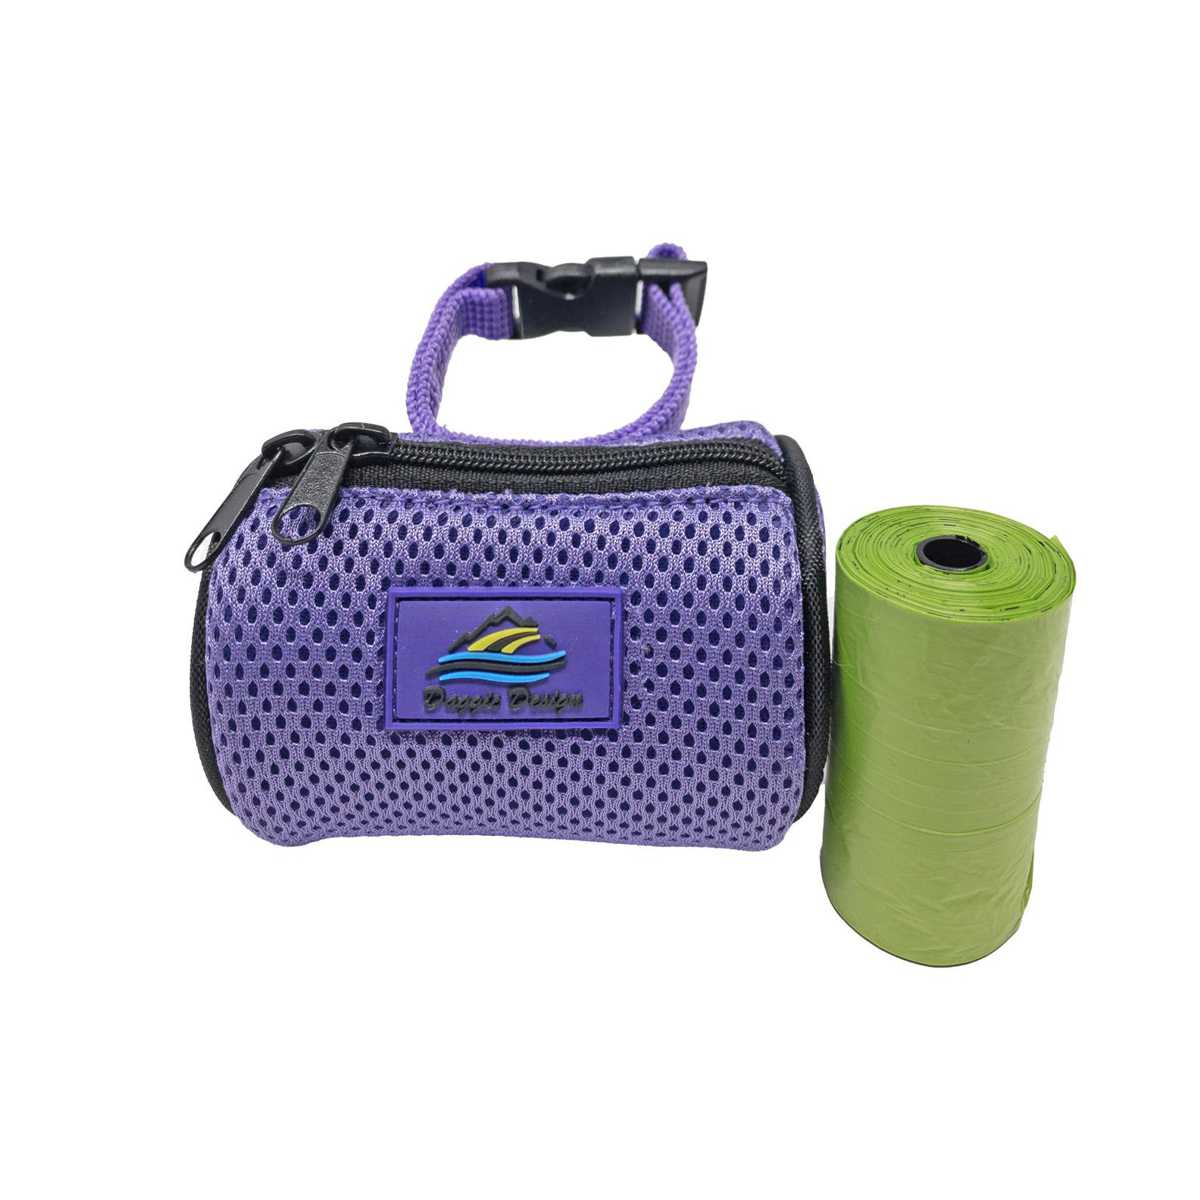 American River Waste Bag Holder in Paisley Purple | Pawlicious & Company